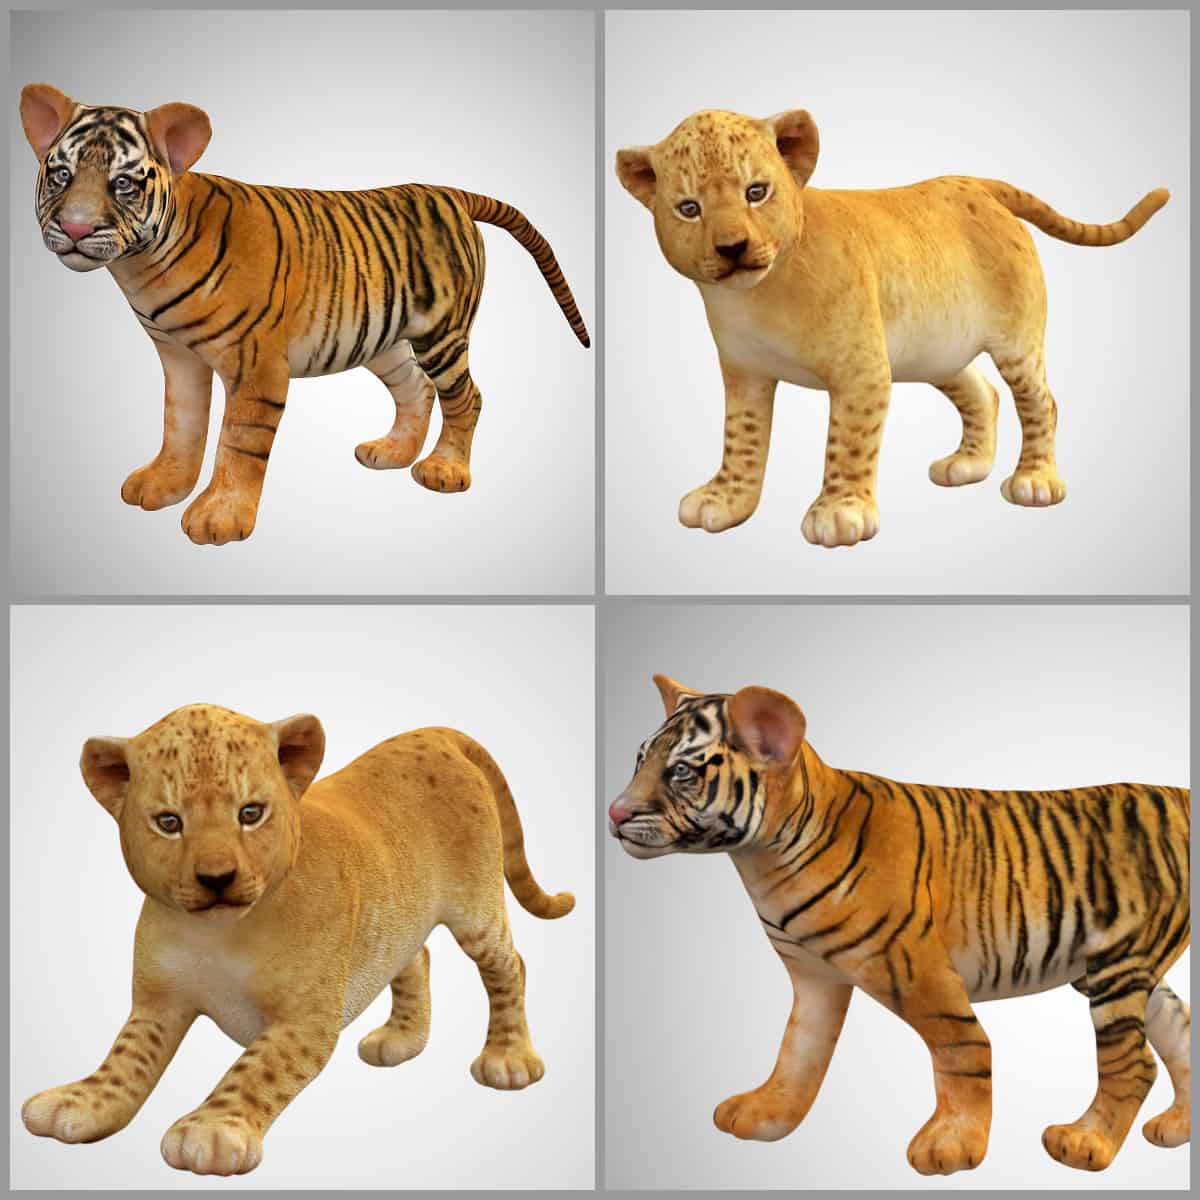 Bengal Tiger 3D Model Rigged and Low Poly Game ready - Team 3d Yard